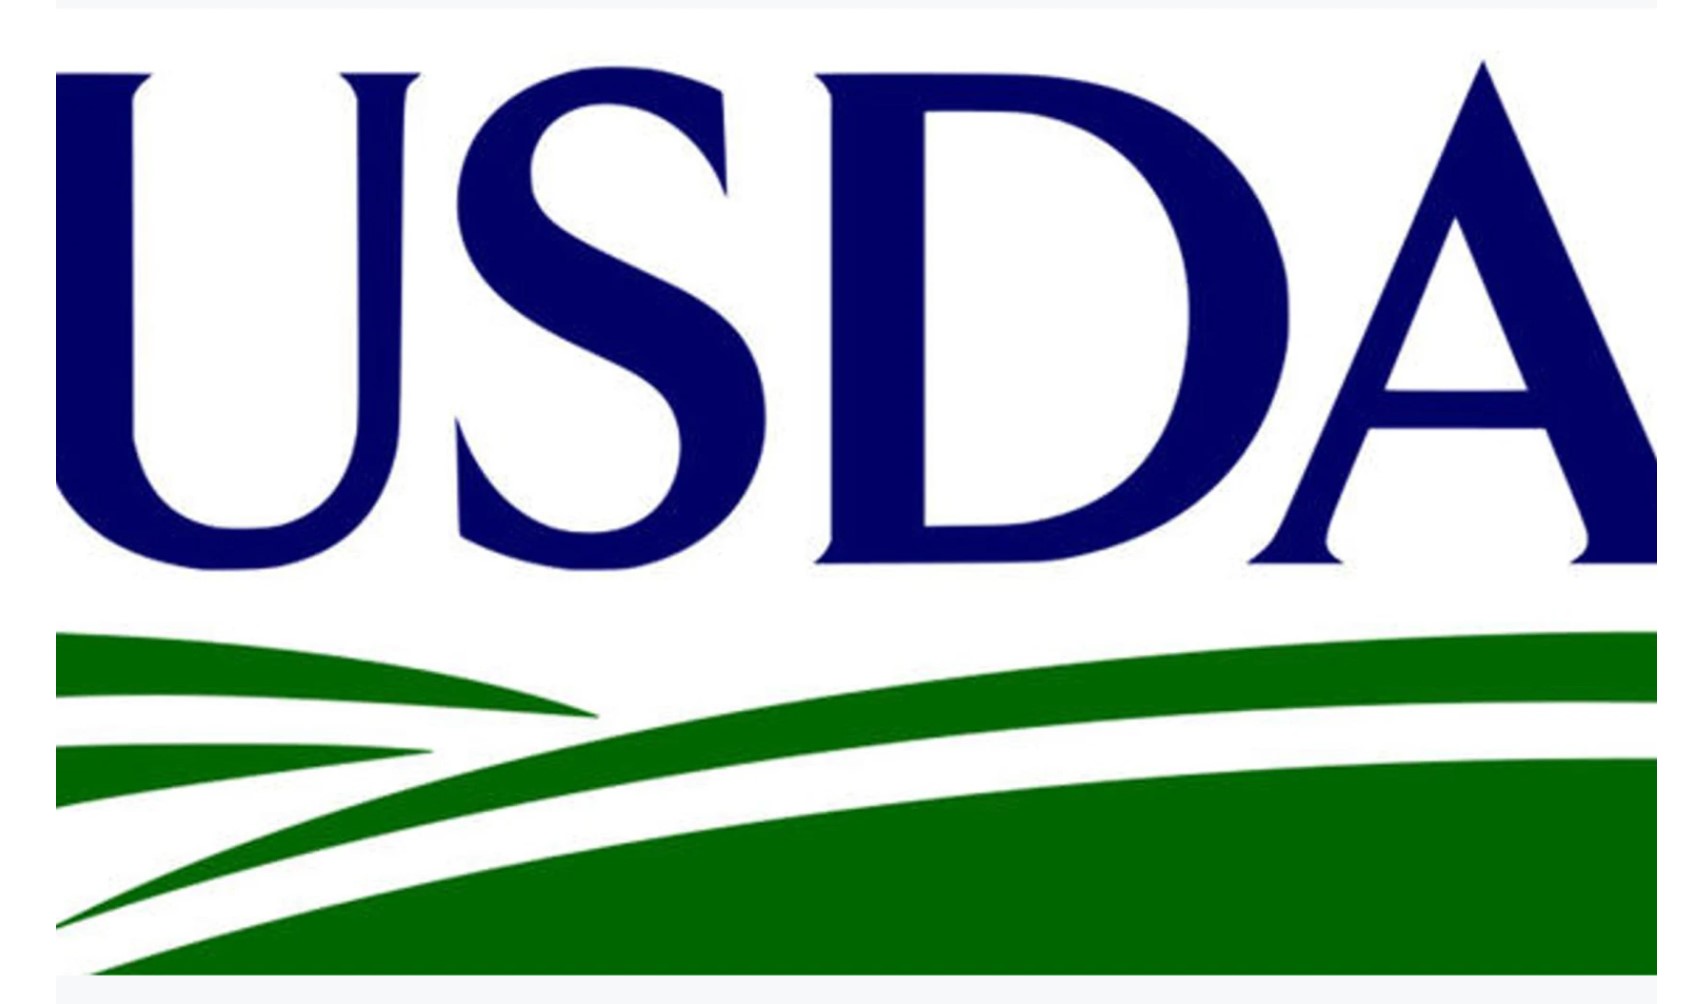 Feeding Indiana’s Hungry Statement on USDA Announcement of Nearly $1.5 Billion in New Investments in Hunger Relief